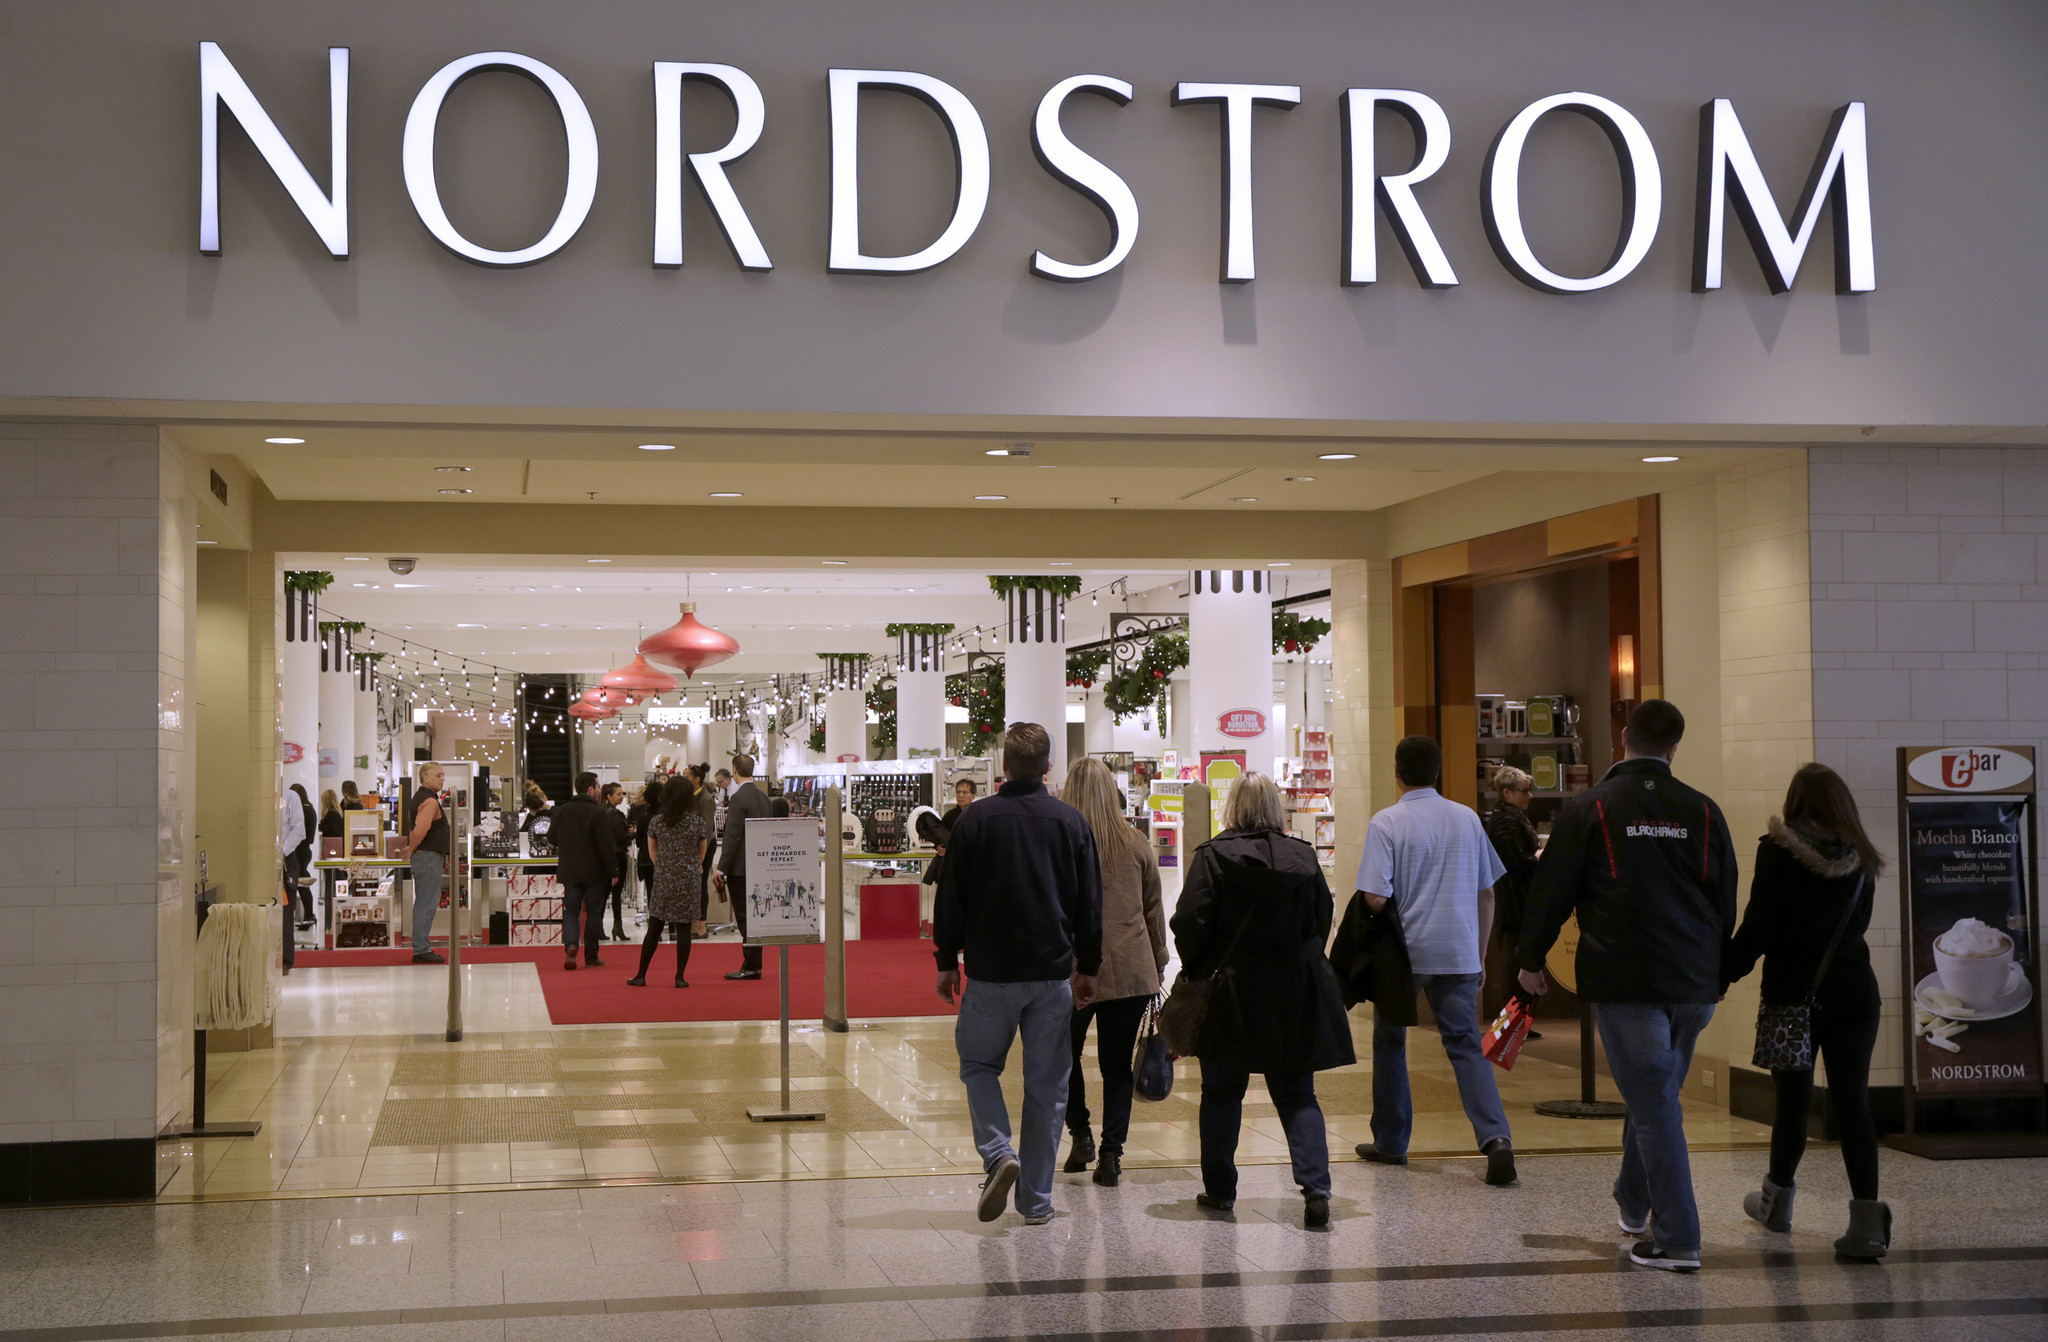 Whats next for Salem Center without Nordstrom?